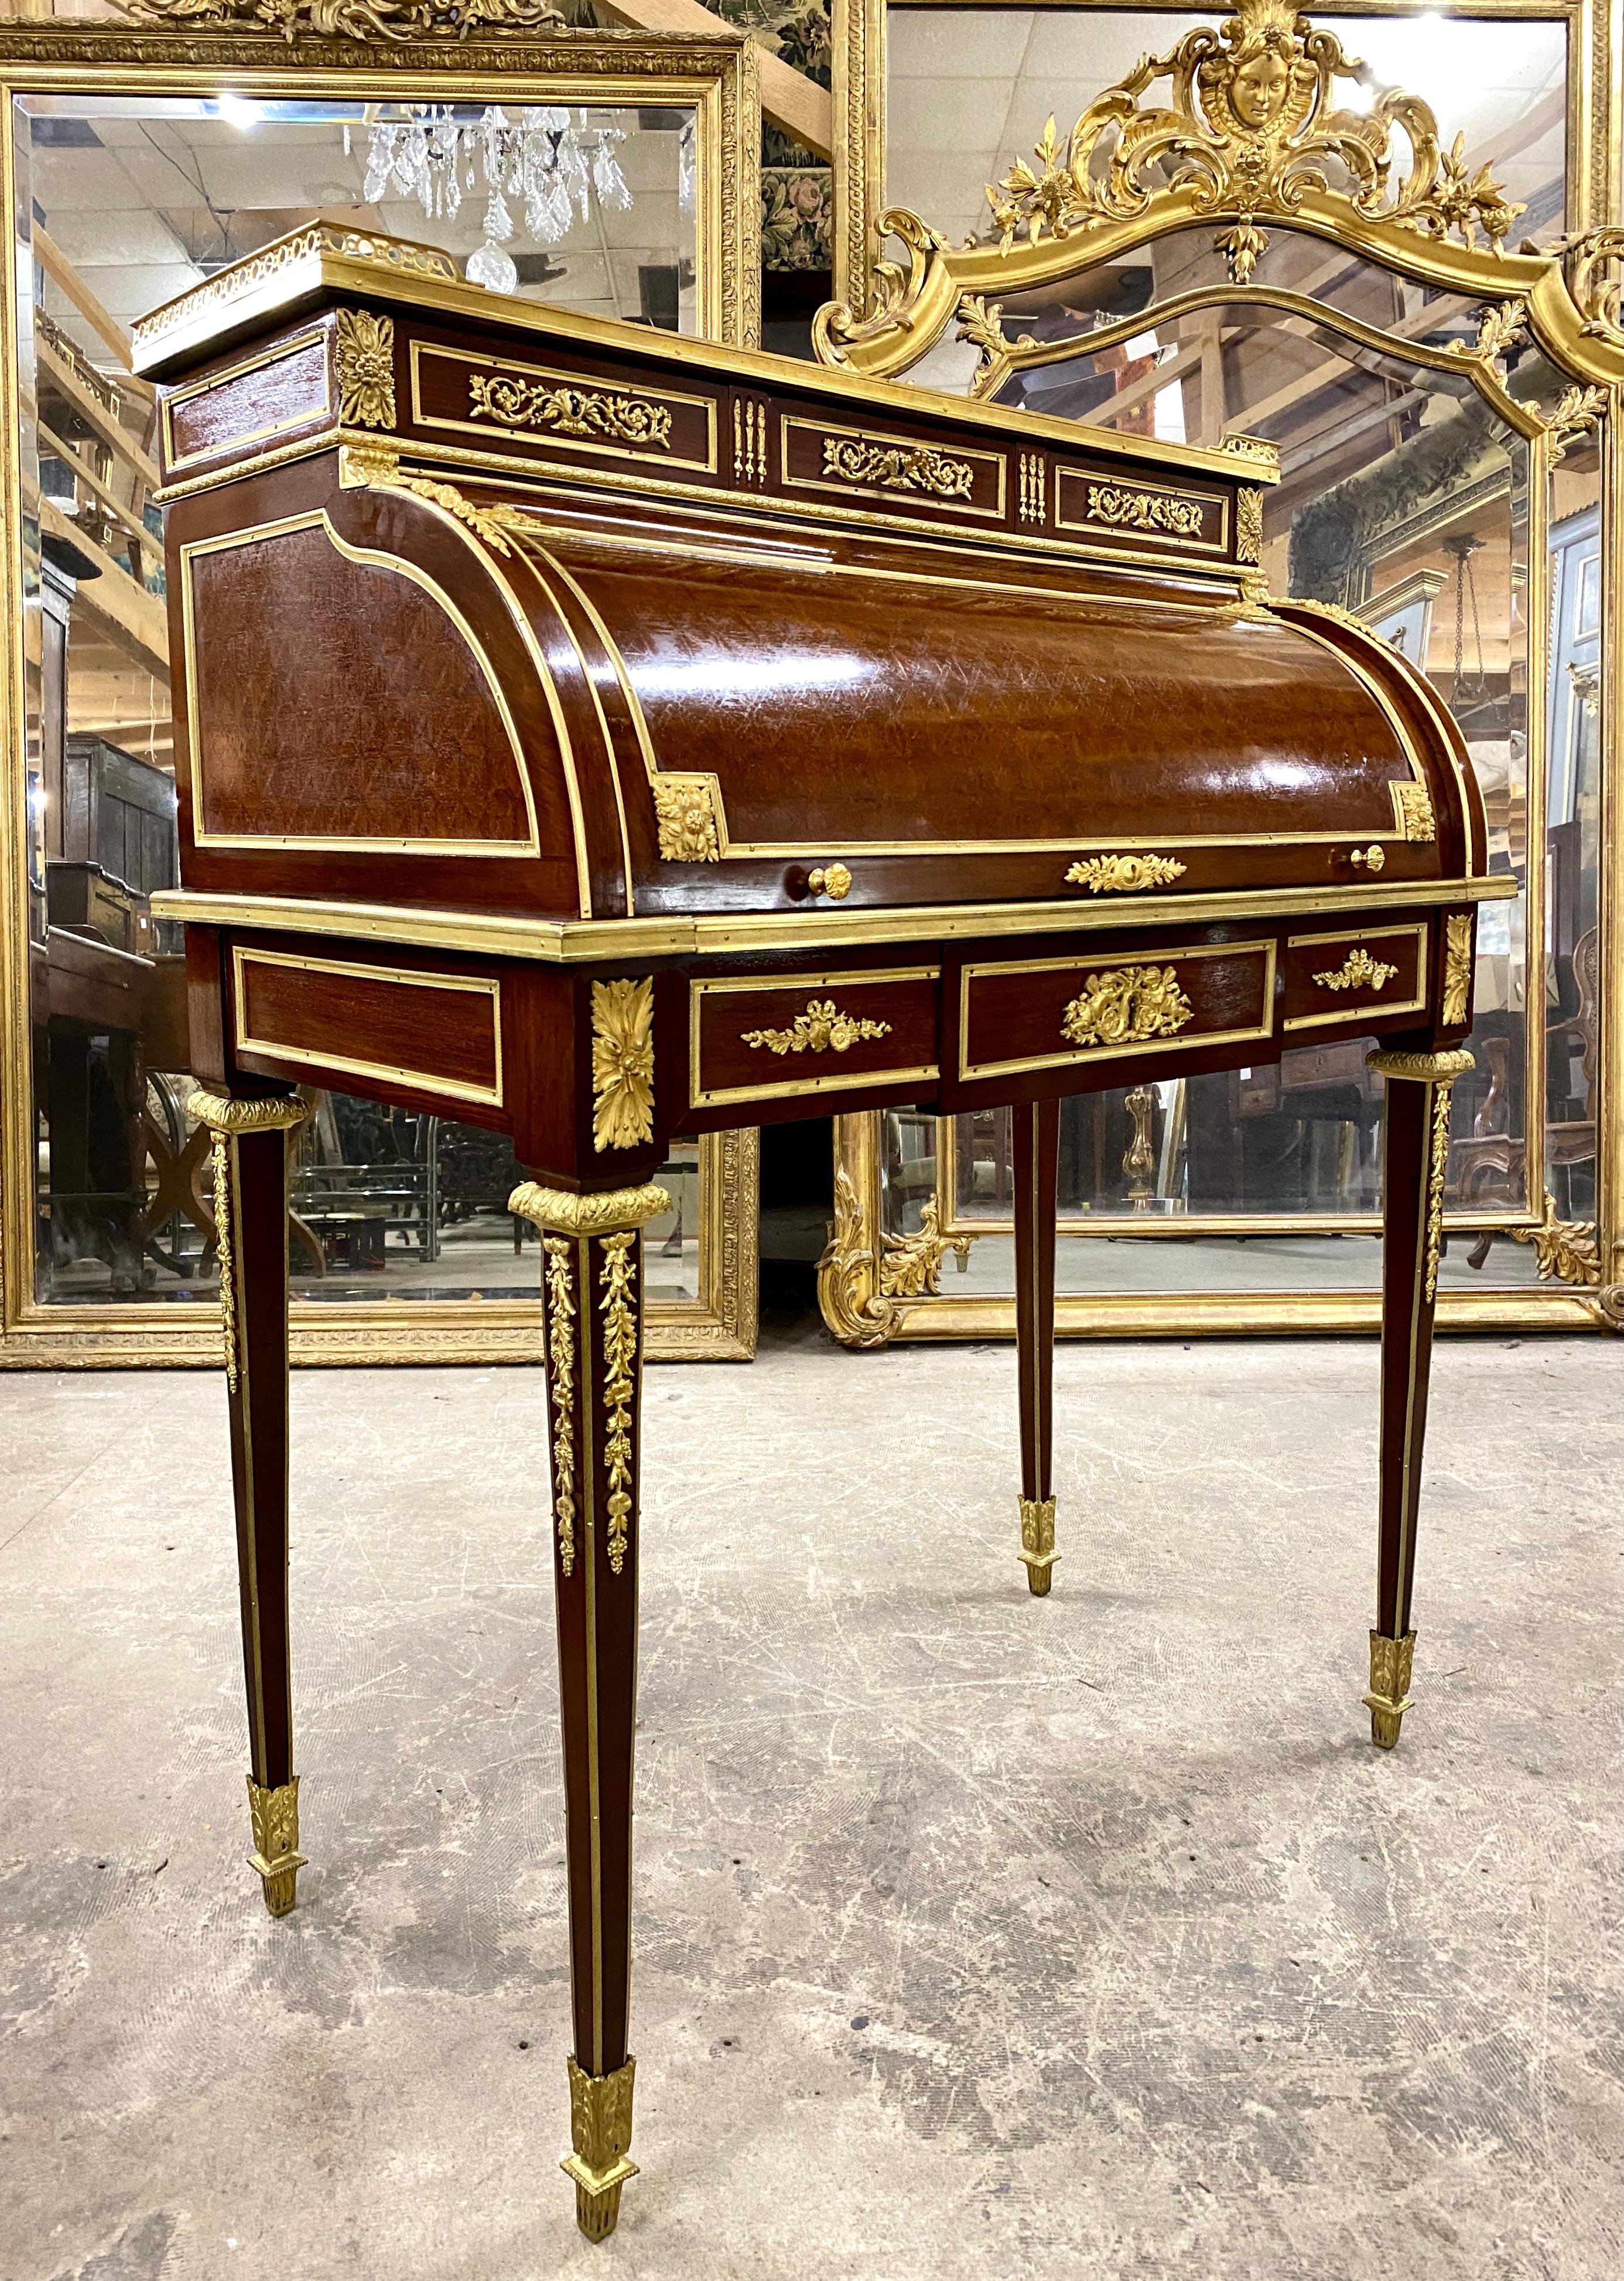 Cylinder desk surmounted by a tier, richly decorated with chiseled and gilded bronzes and a cube marquetry. It opens with three drawers in a belt locked with a central lock, as well as three other drawers at the level of the tier. The cylinder is